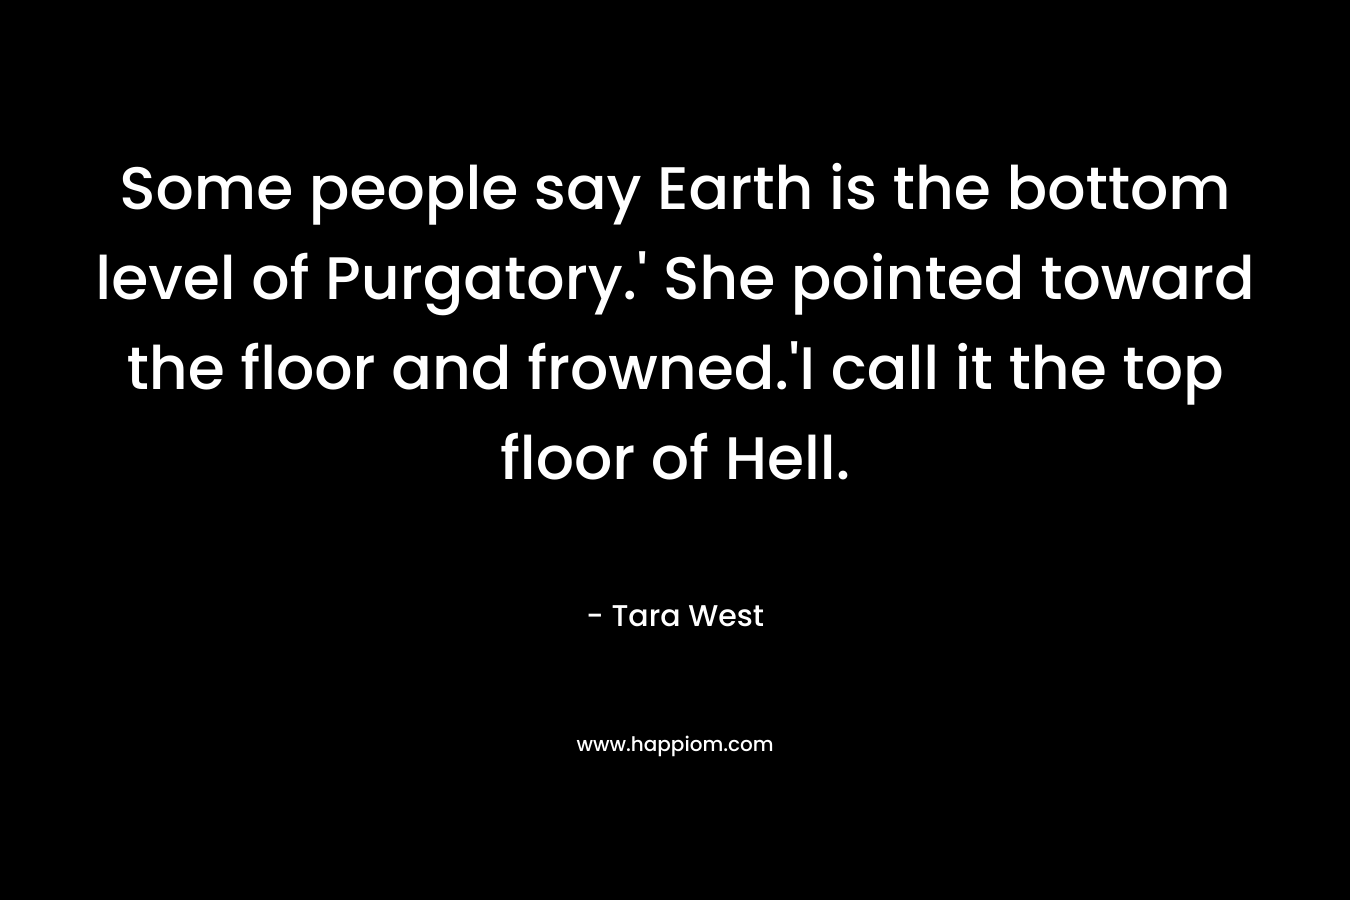 Some people say Earth is the bottom level of Purgatory.' She pointed toward the floor and frowned.'I call it the top floor of Hell.